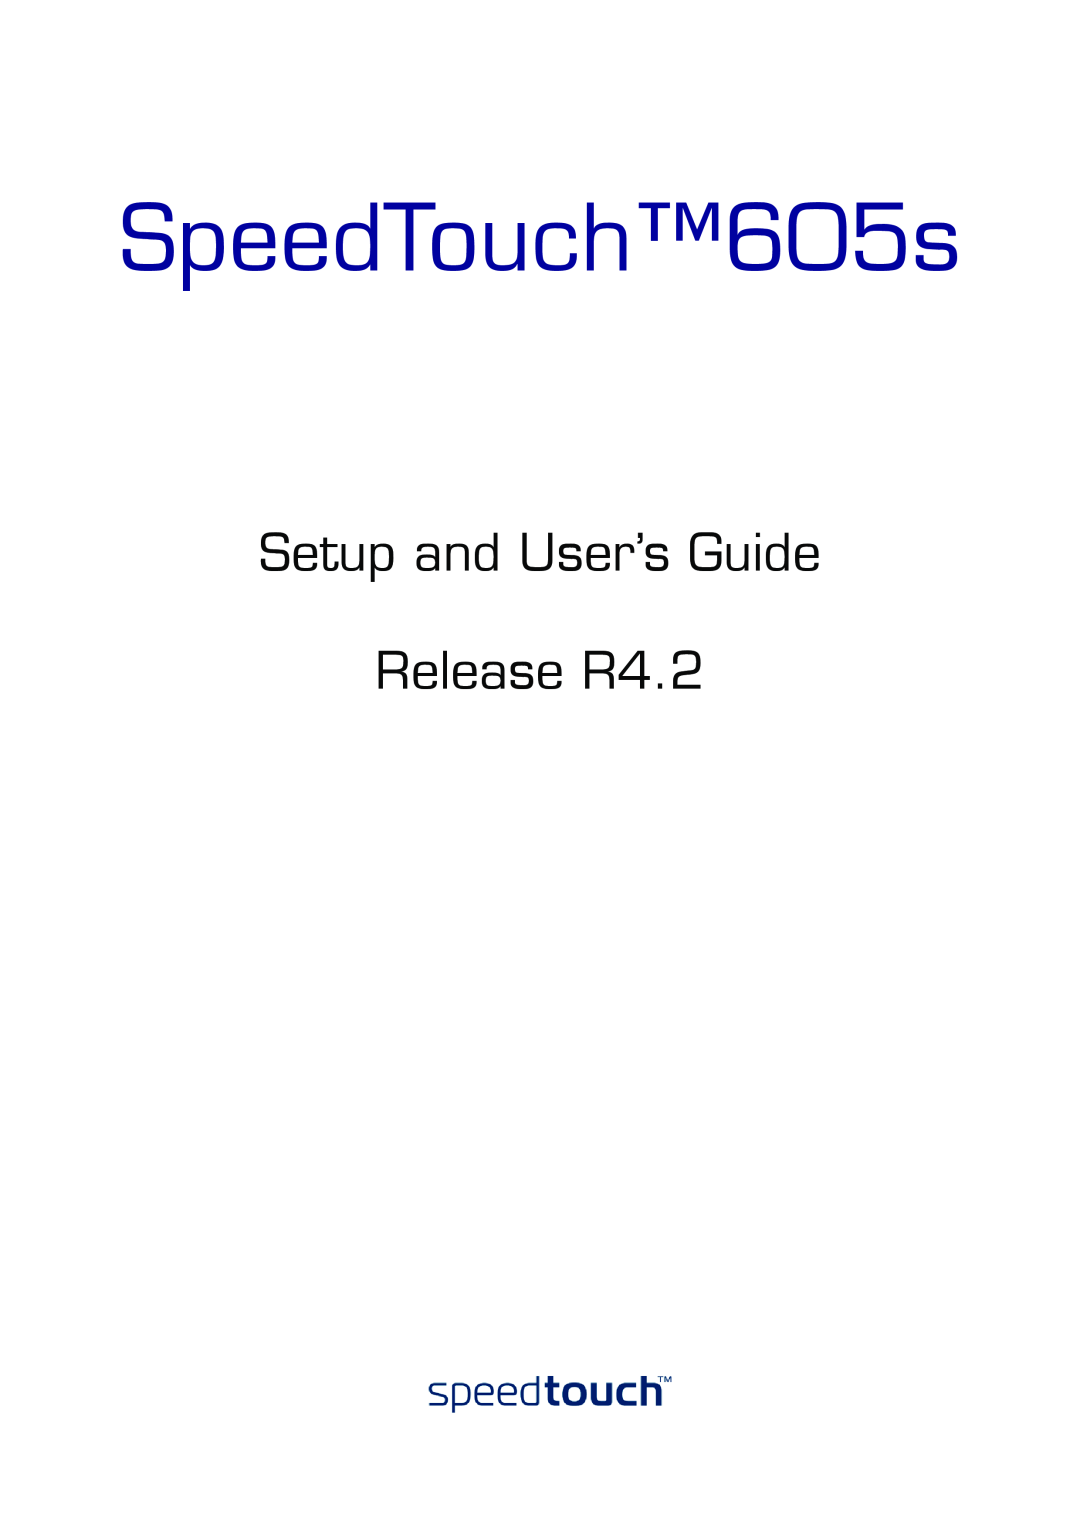 Technicolor - Thomson 605S manual SpeedTouch605s, Setup and User’s Guide Release R4.2 